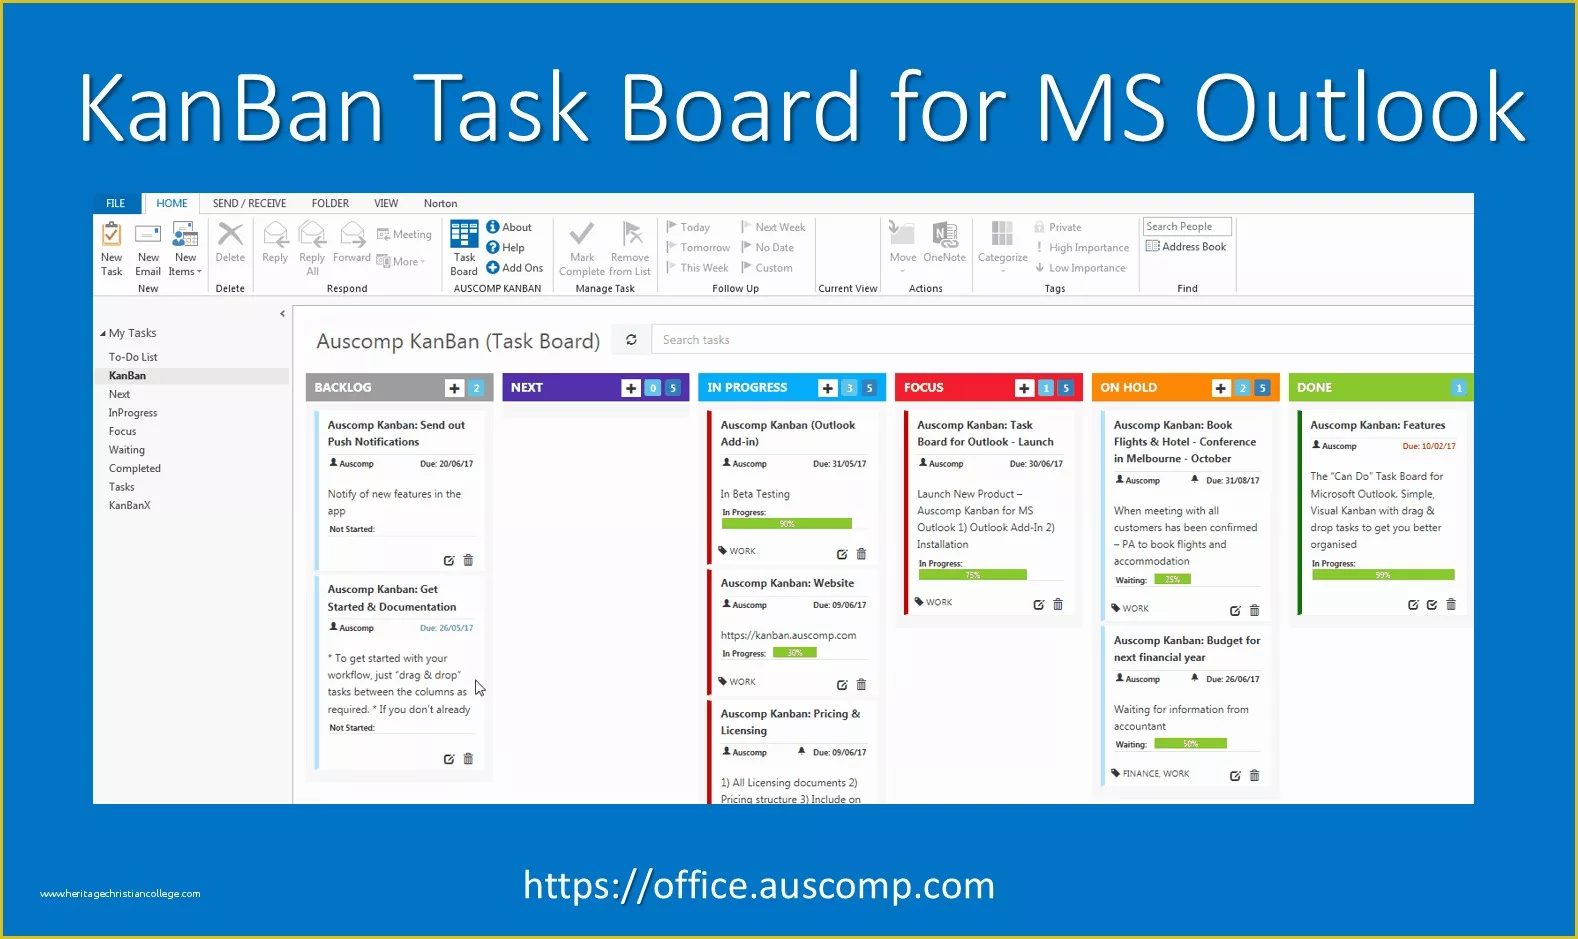 Kanban Board Template Free Of for All Ms Outlook Users who are Frustrated Office365